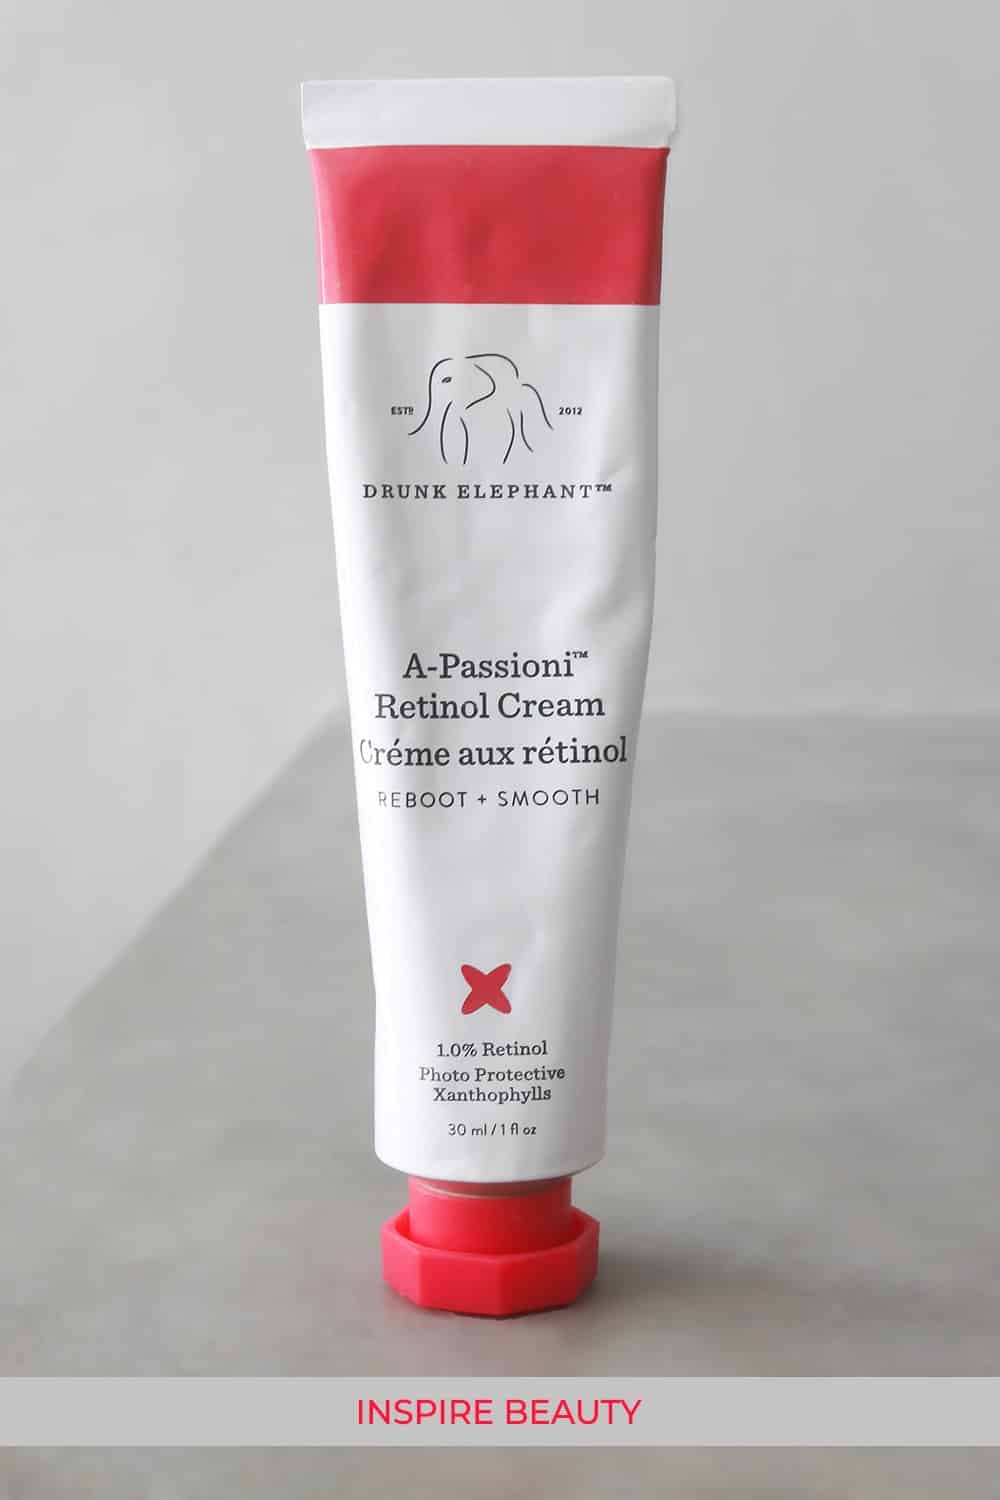 Drunk Elephant A-Passioni Retinol Cream review, this retinol is strong but when used correctly can really firm and smooth the skin.